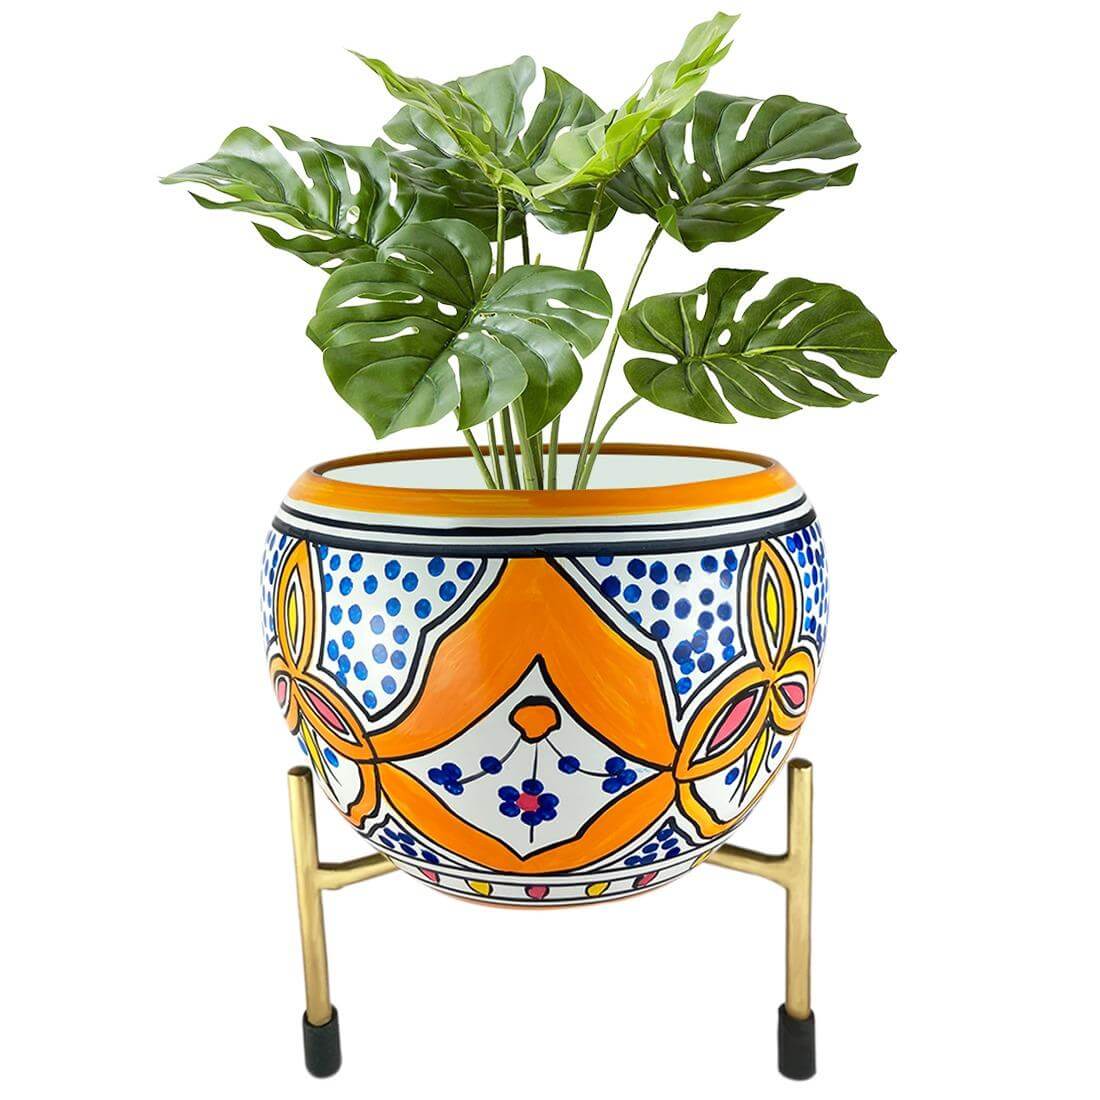 APPLE DESIGN FLOWER POT HAND PRINTED KASHMIRI WITH STAND